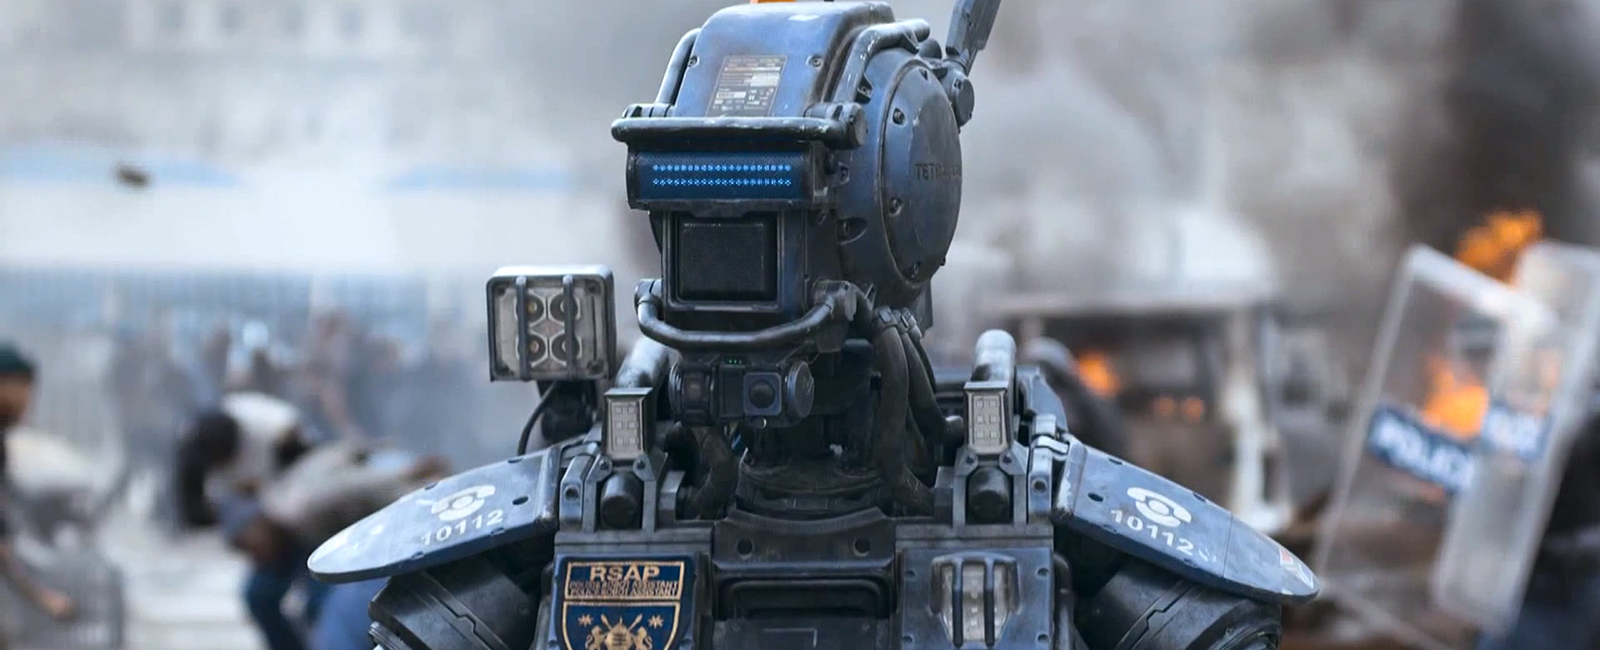 CHAPPIE – Official Movie Trailer